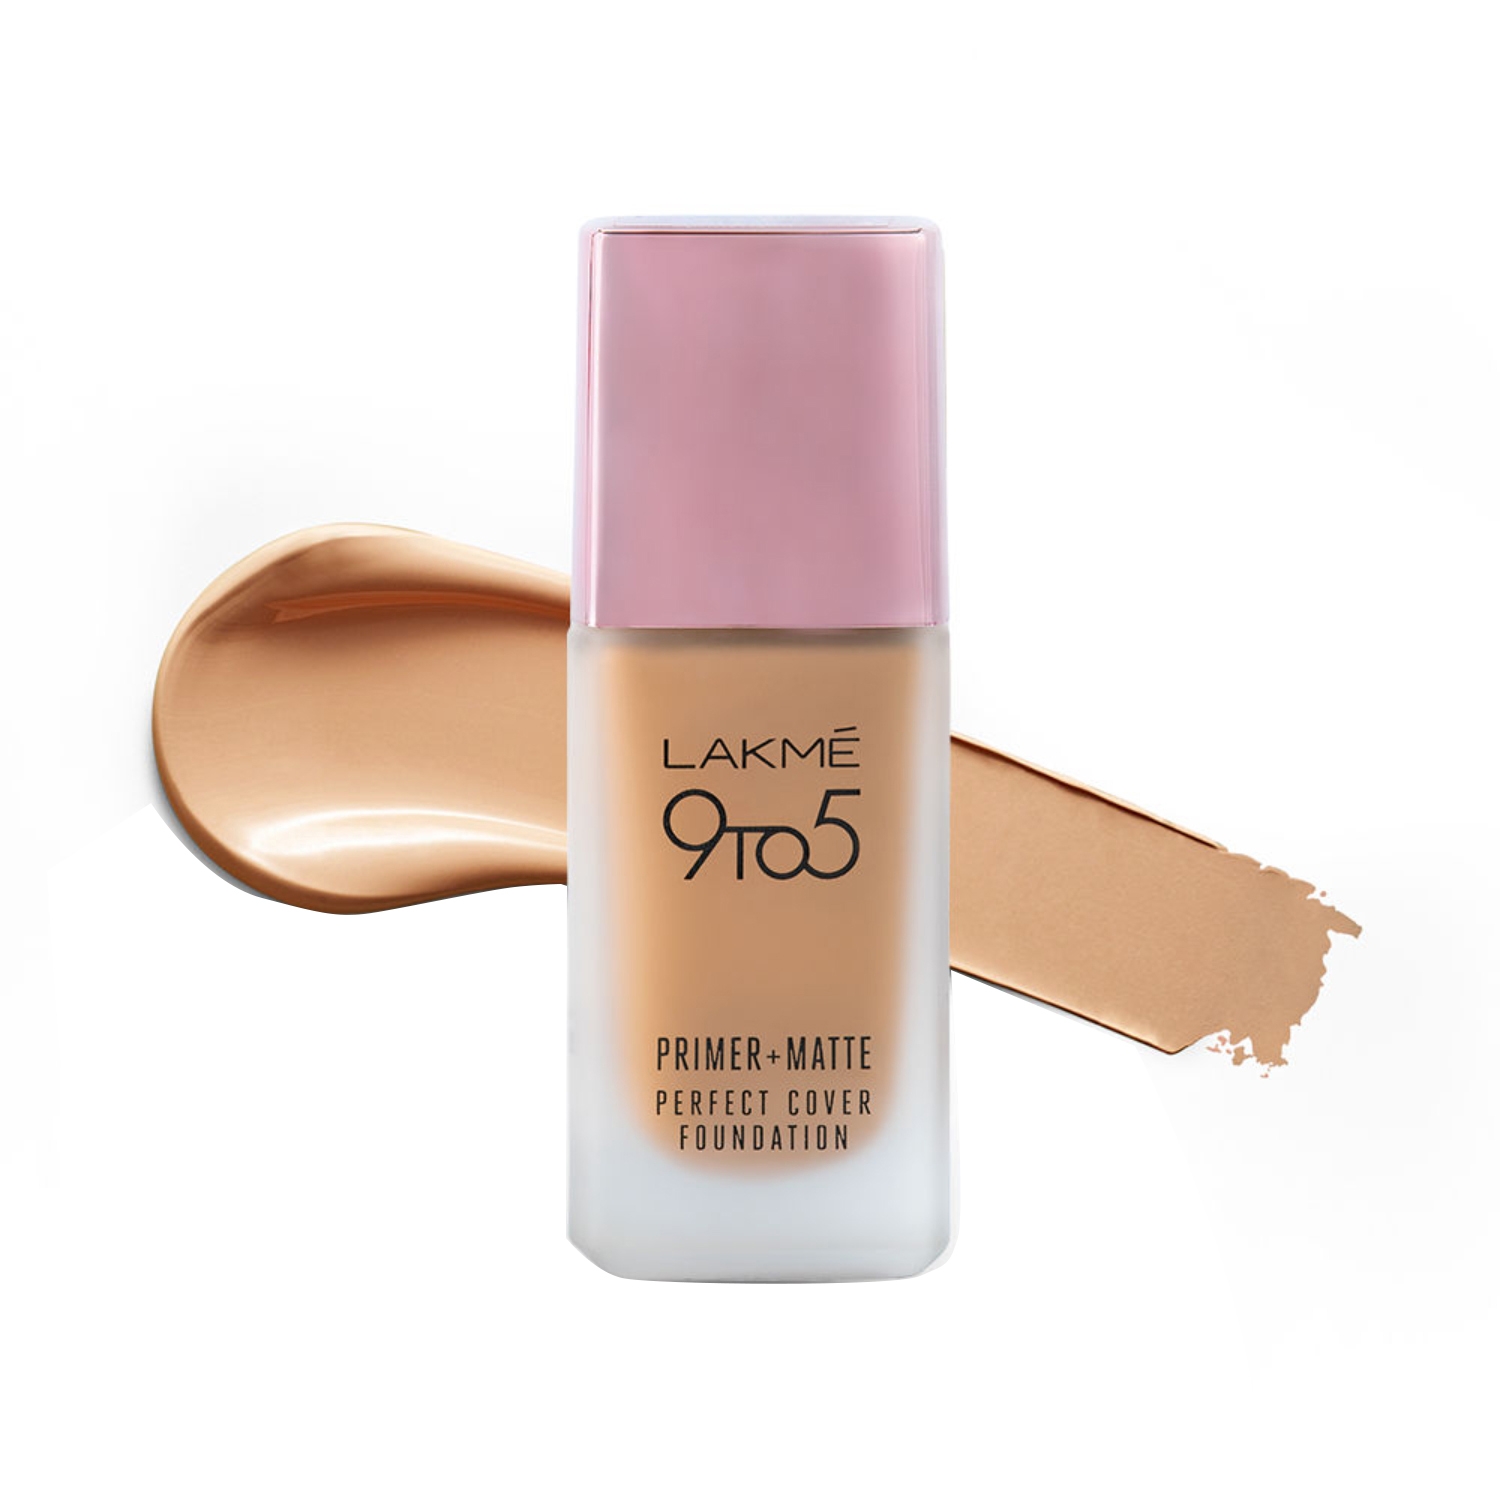 Lakme | Lakme 9 To 5 Primer + Matte Perfect Cover Foundation - W180 Warm Natural (25ml)